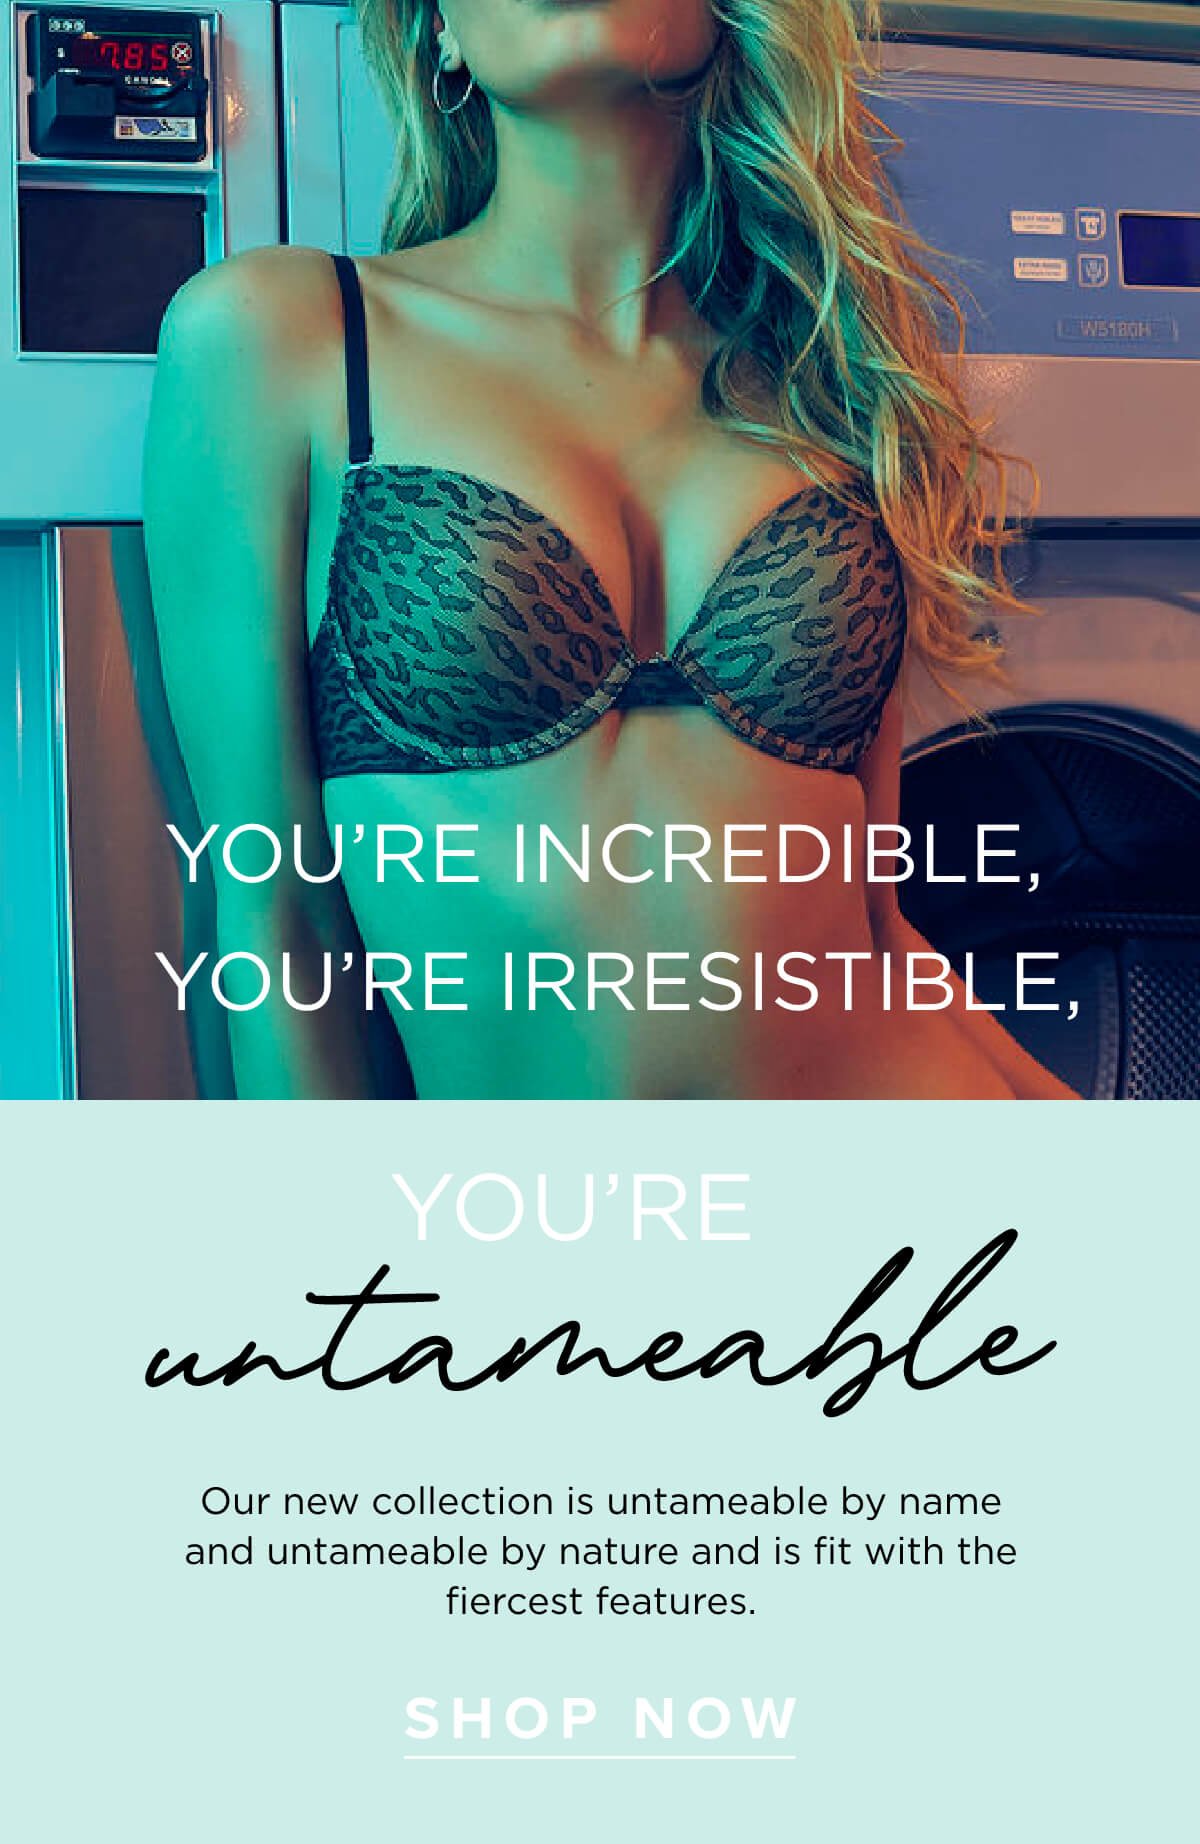 Introducing: The Cloud 9 of Bras 😍 - Frederick's of Hollywood